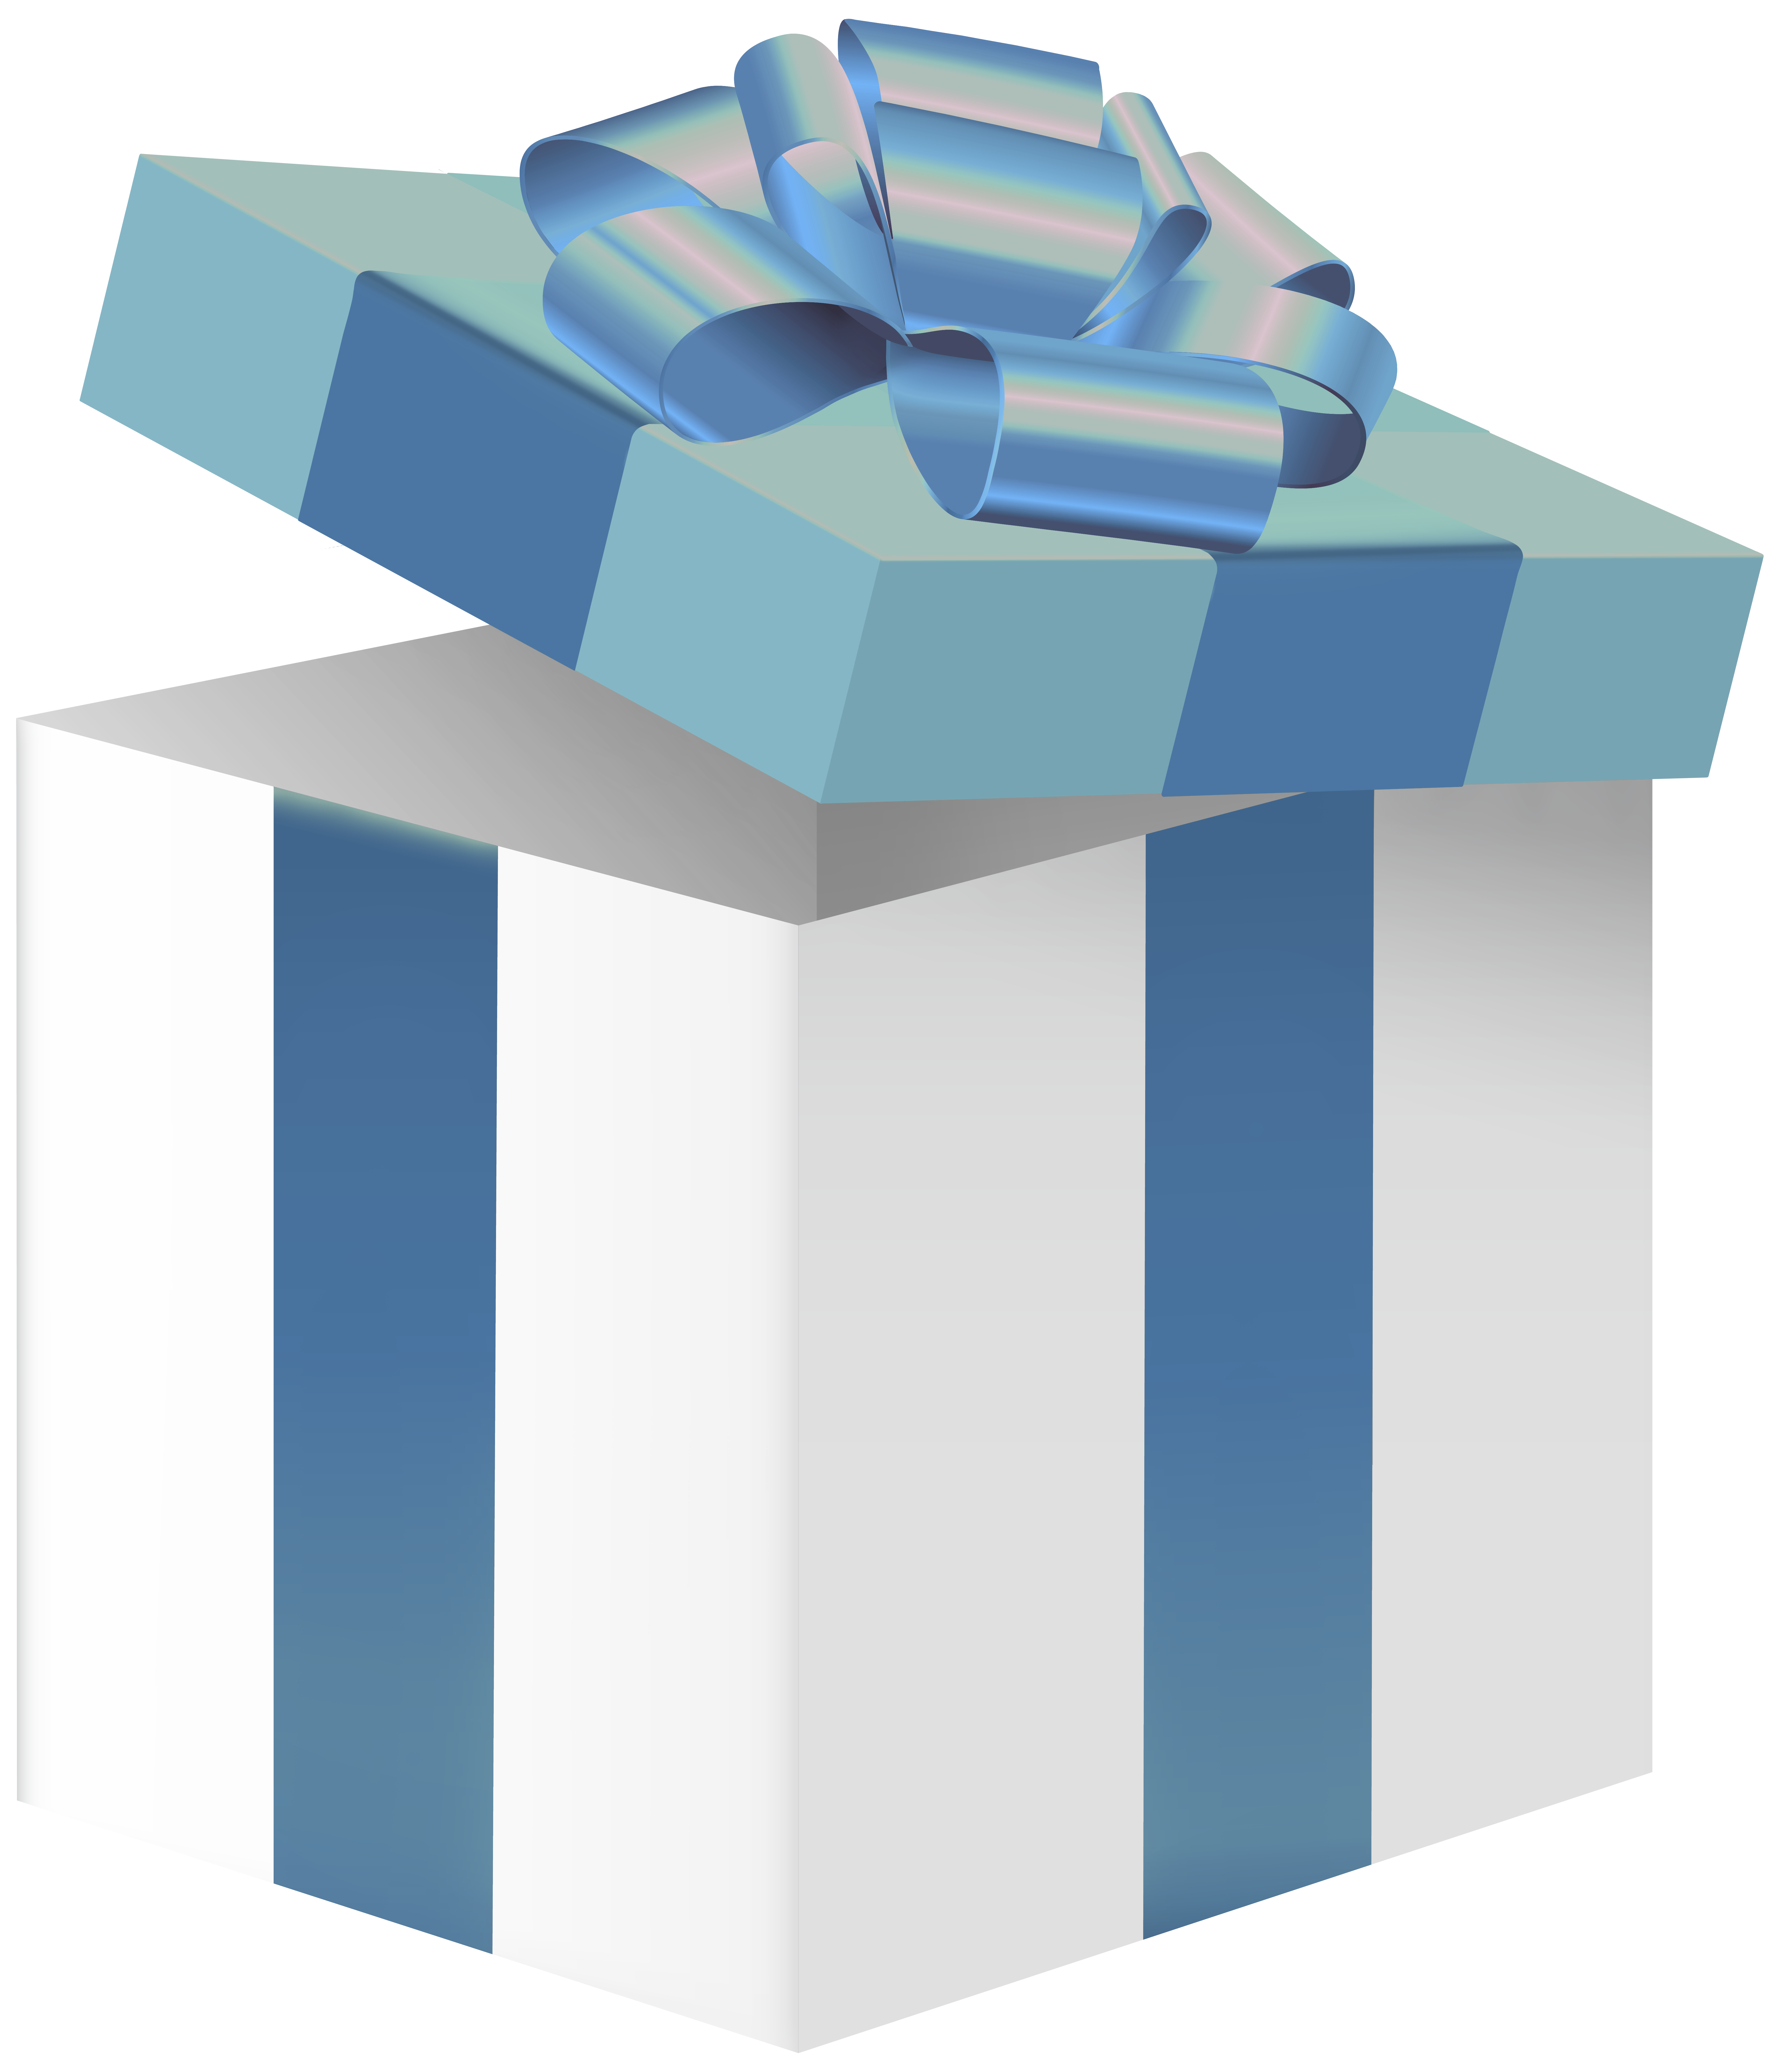 https://gallery.yopriceville.com/var/albums/Free-Clipart-Pictures/Gifts-and-Chocolates-PNG-/Cute_Blue_Gift_Box_PNG_Transparent_Clipart.png?m=1654506683